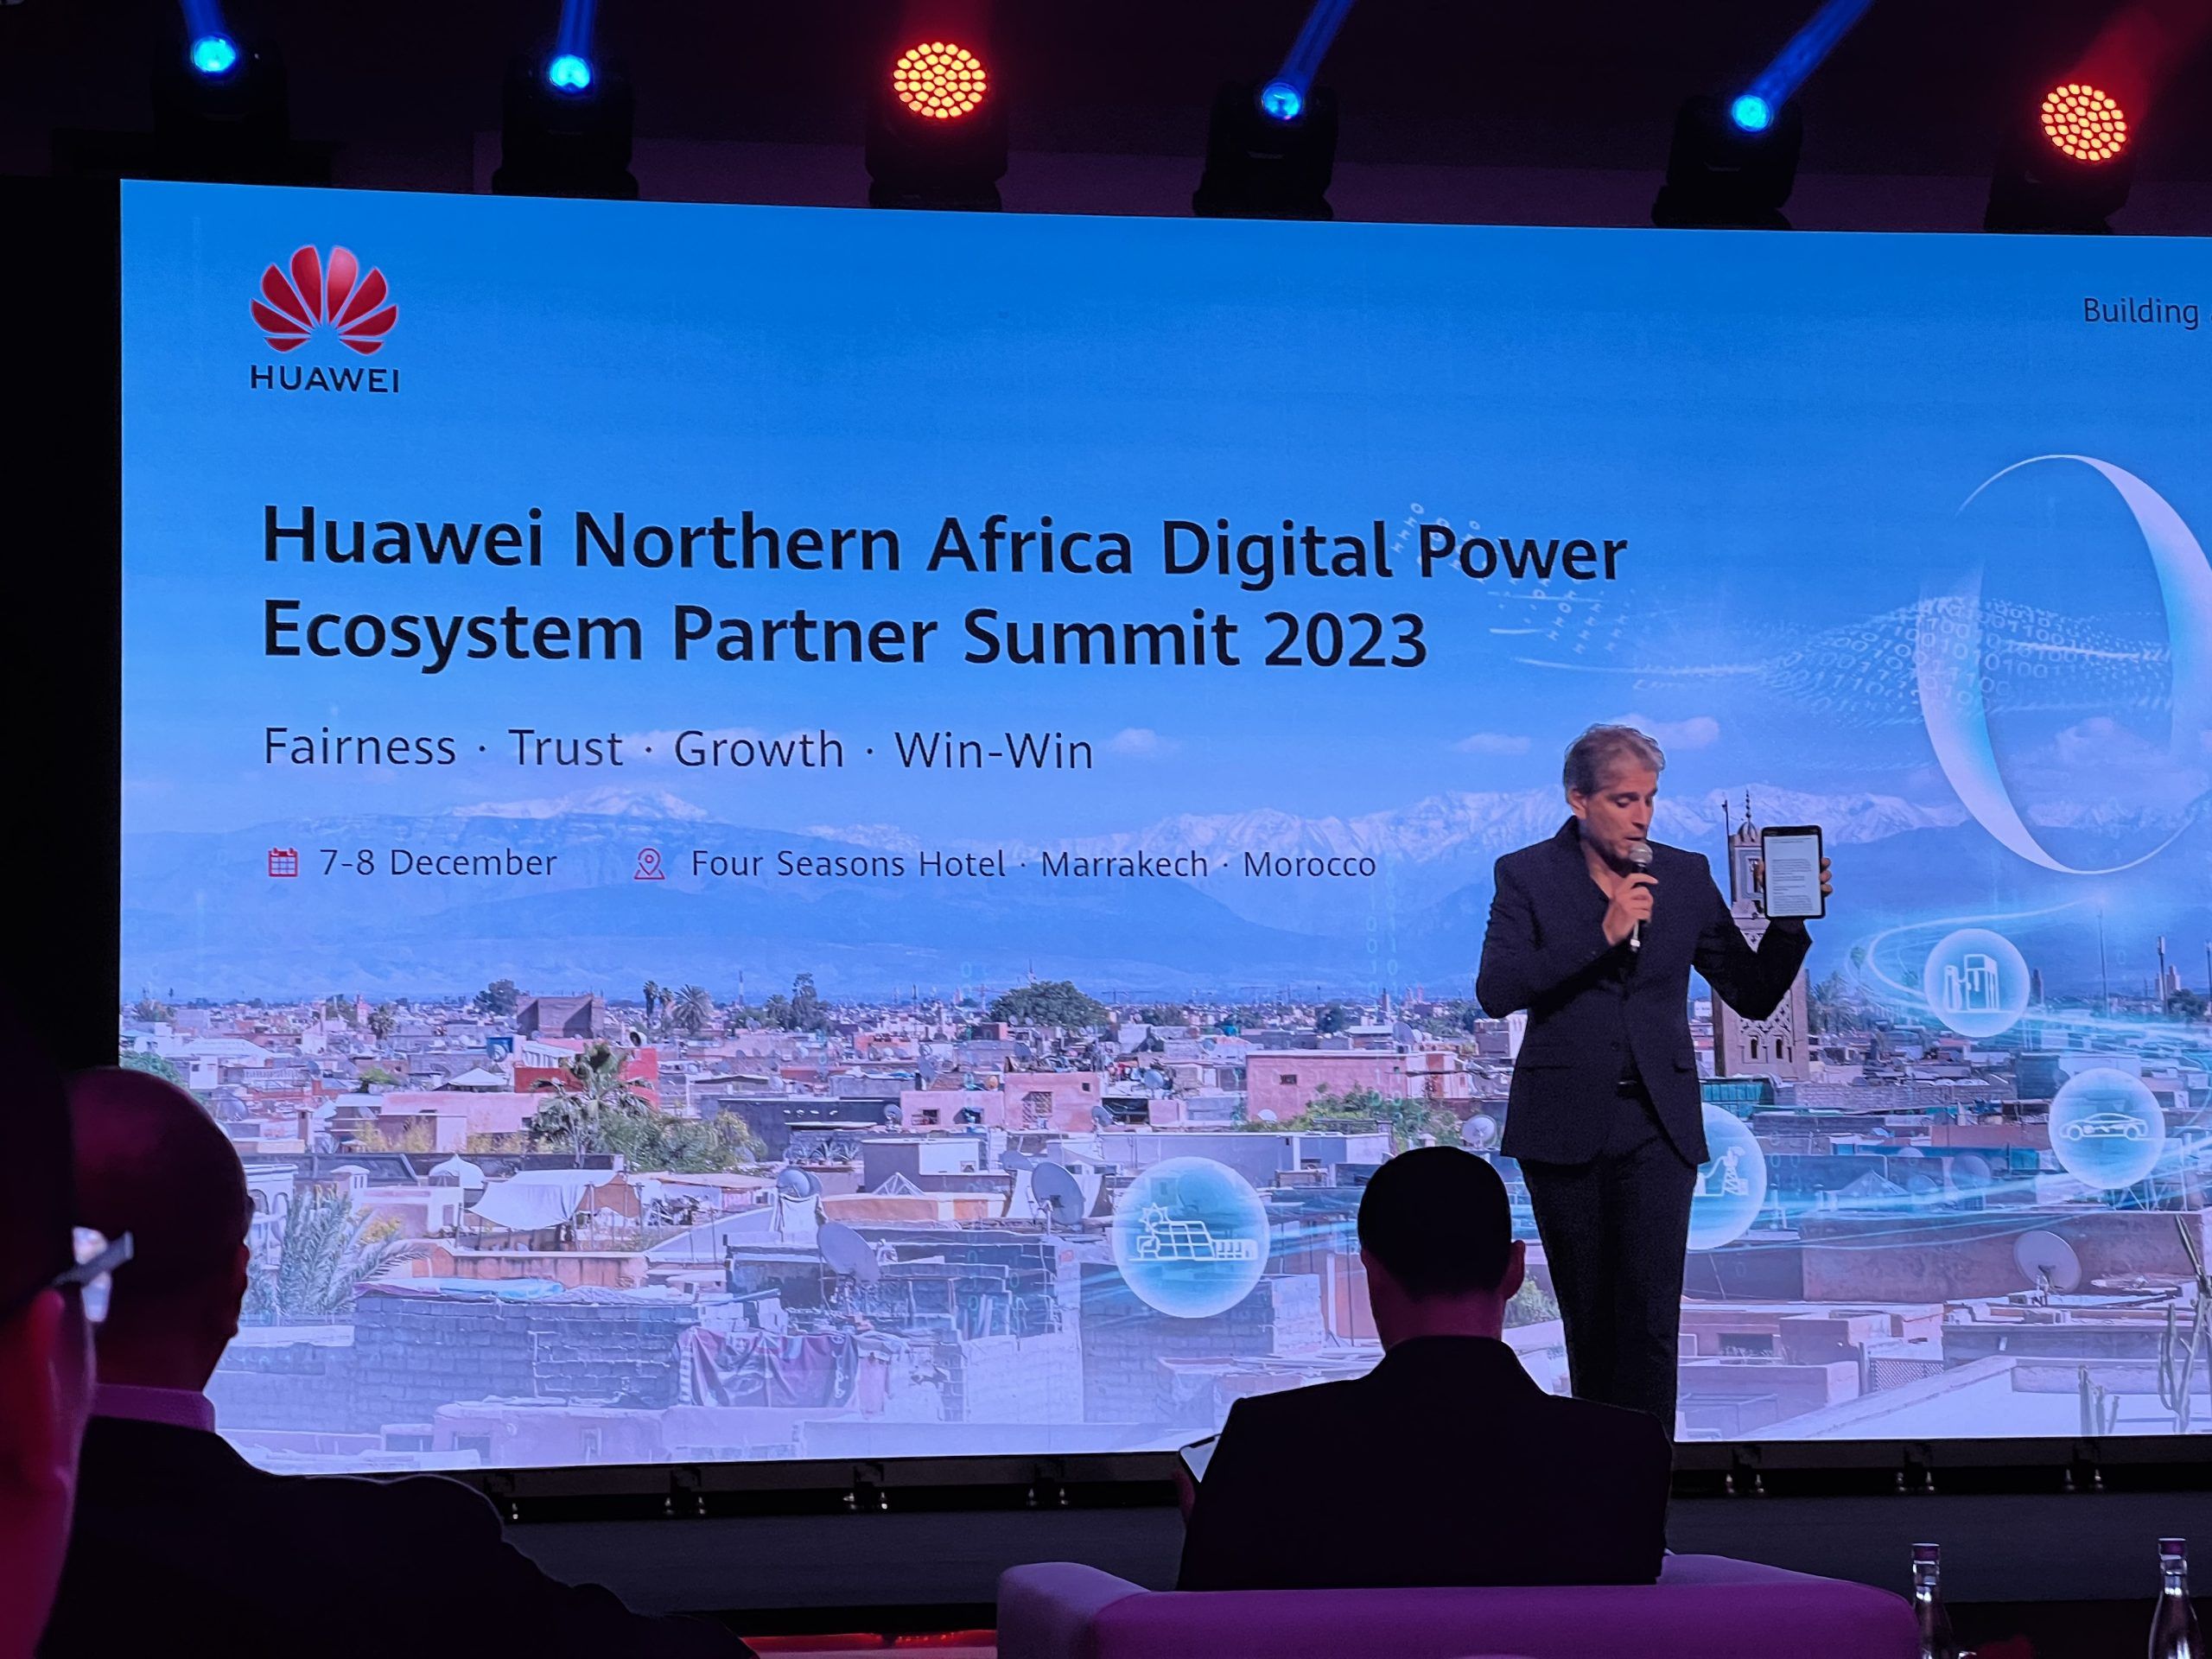 Hamza Krir, CCO of Senwan Group, proudly holds the “Excellent Partner Award 2023” plaque at the Huawei Northern Africa Digital Power Ecosystem Partner Summit 2023, surrounded by industry representatives and digital conference displays, highlighting innovation and collaboration in the digital power sector.